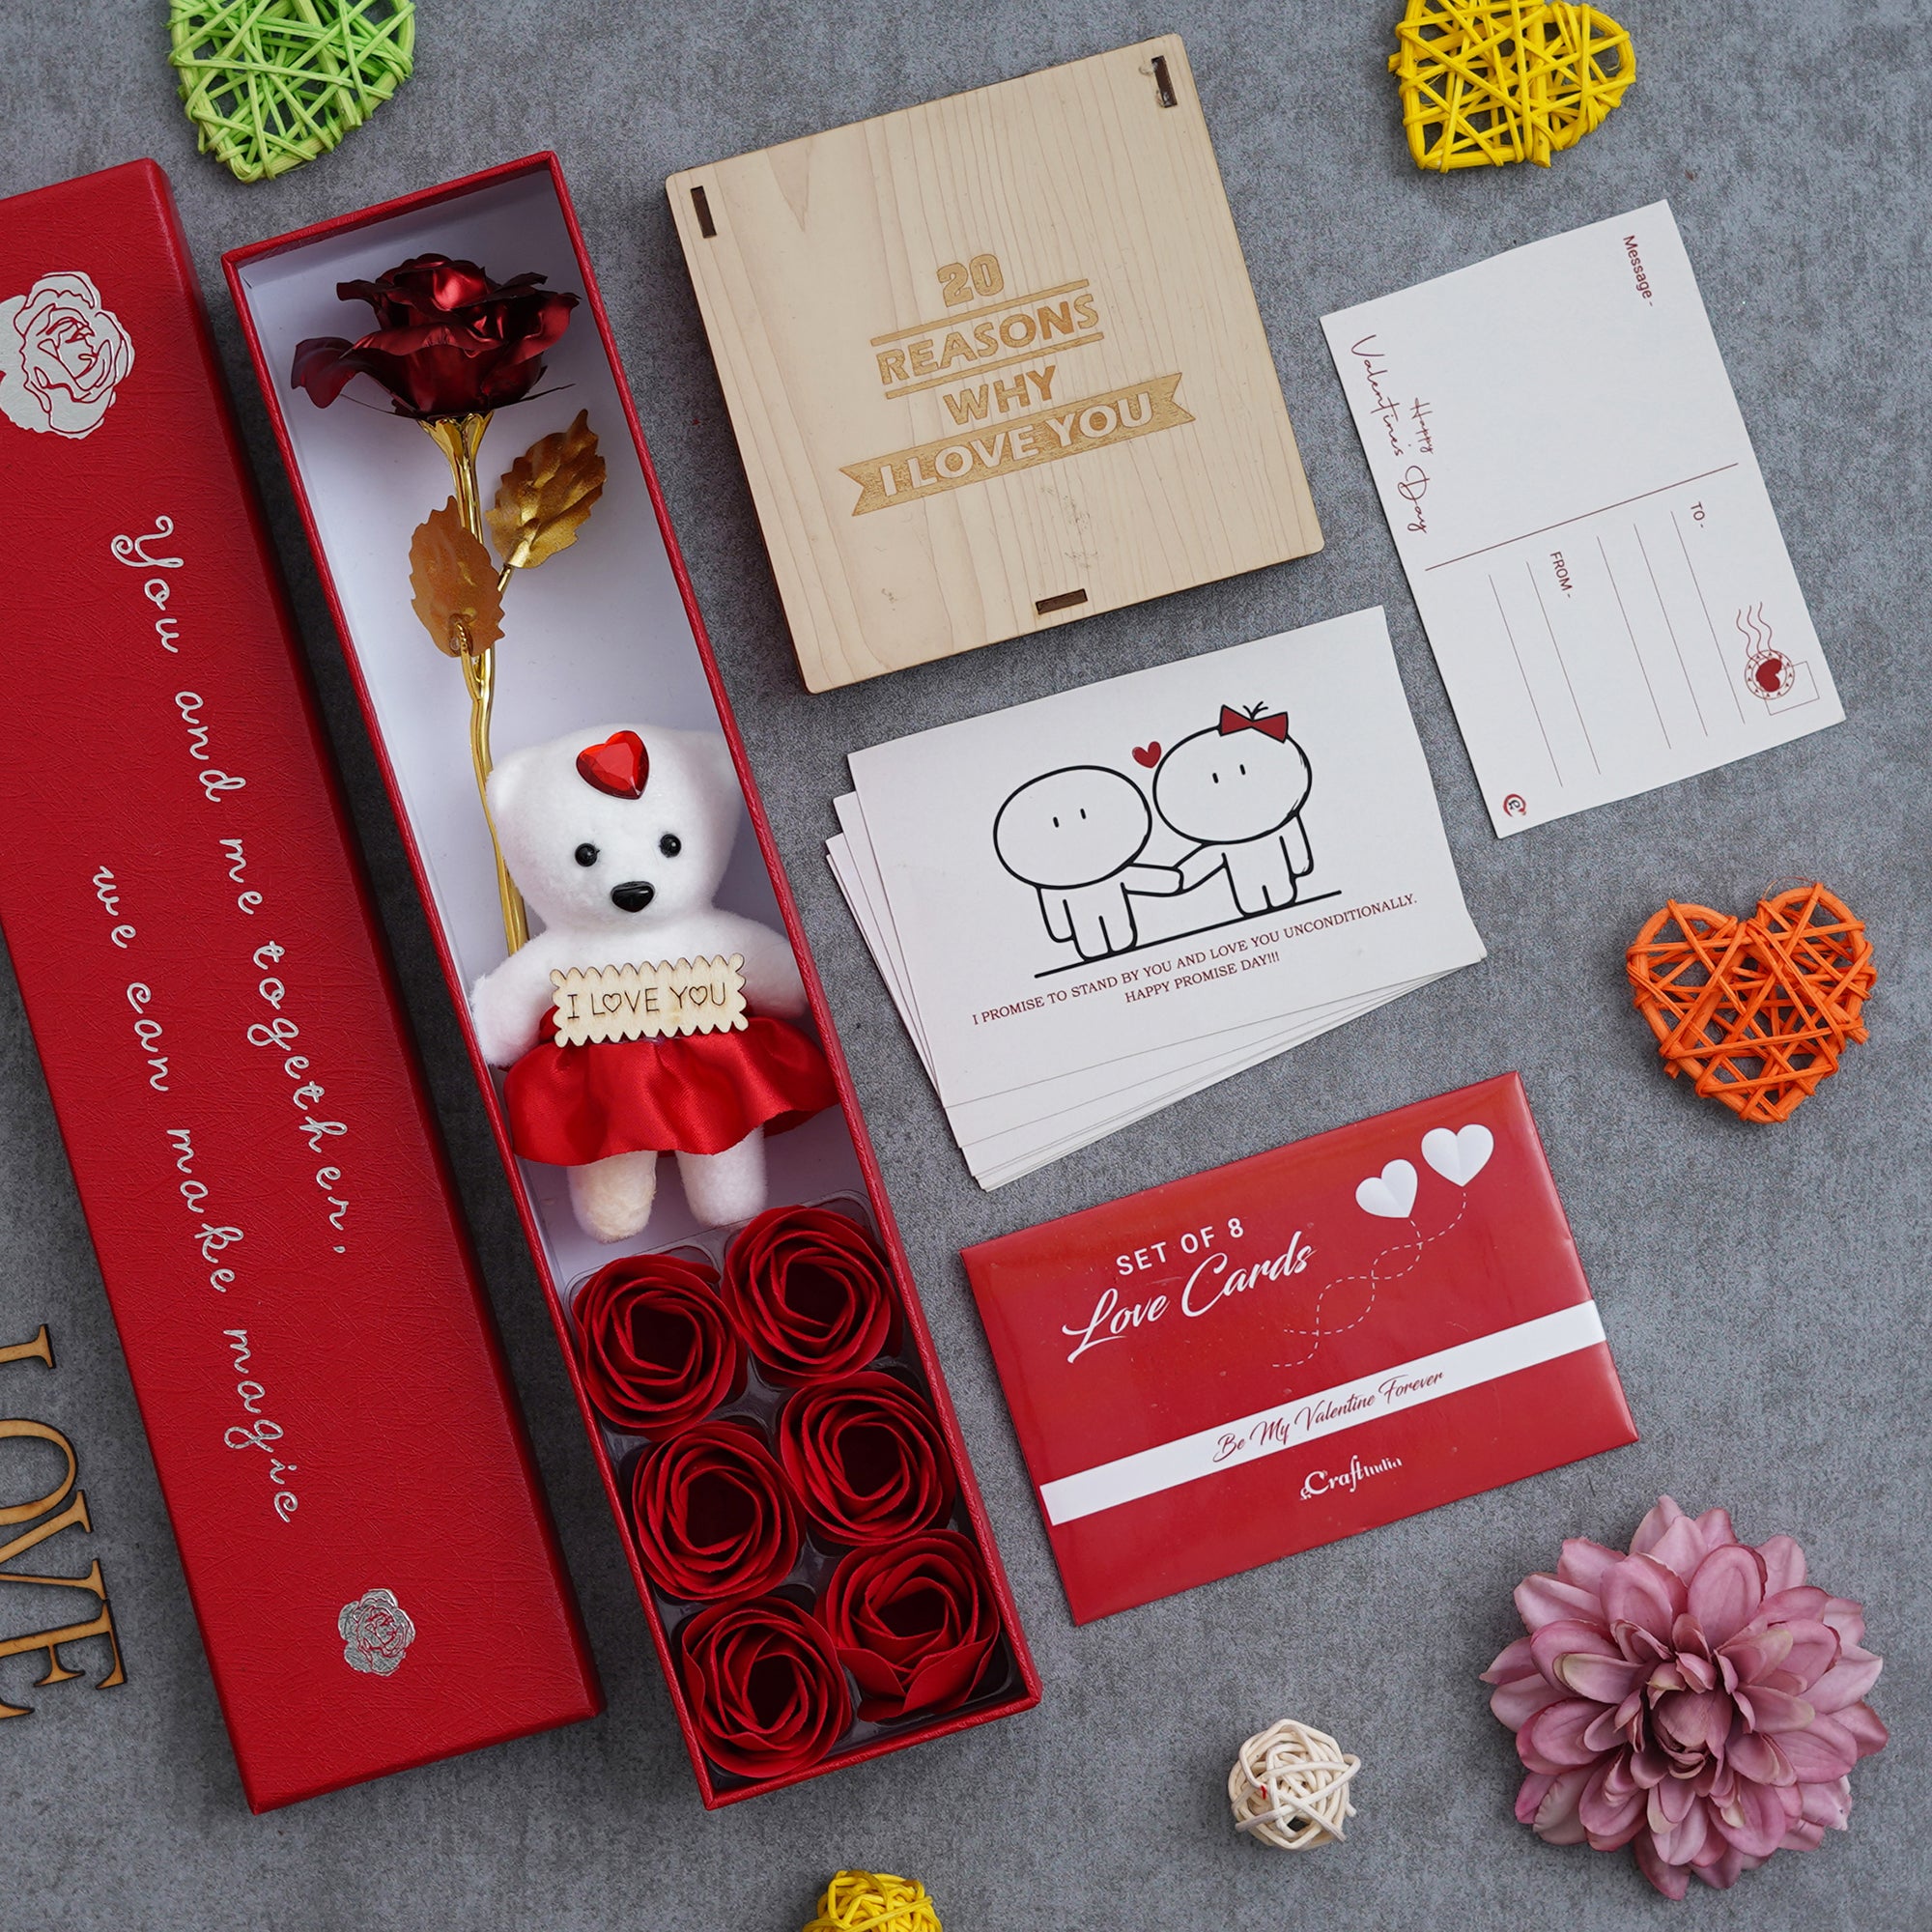 Valentine Combo of Set of 8 Love Post Cards Gift Cards Set, Red Gift Box with Teddy & Roses, "20 Reasons Why I Love You" Printed on Little Hearts Wooden Gift Set